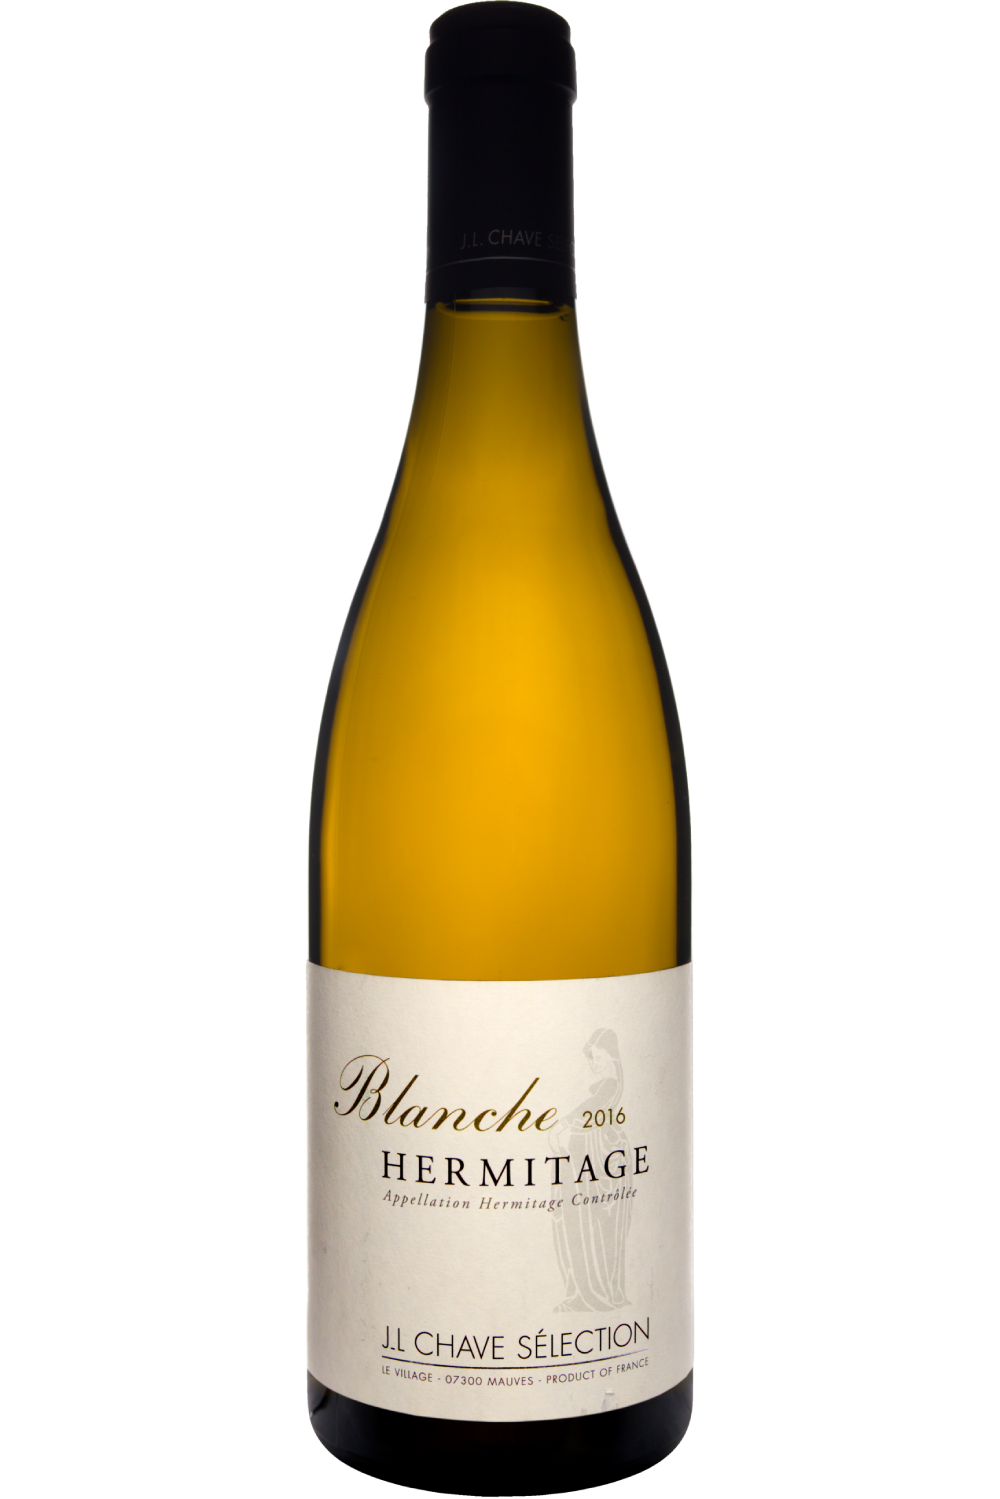 WineVins Jean-Louis Chave Selection Blanche Hermitage 2016